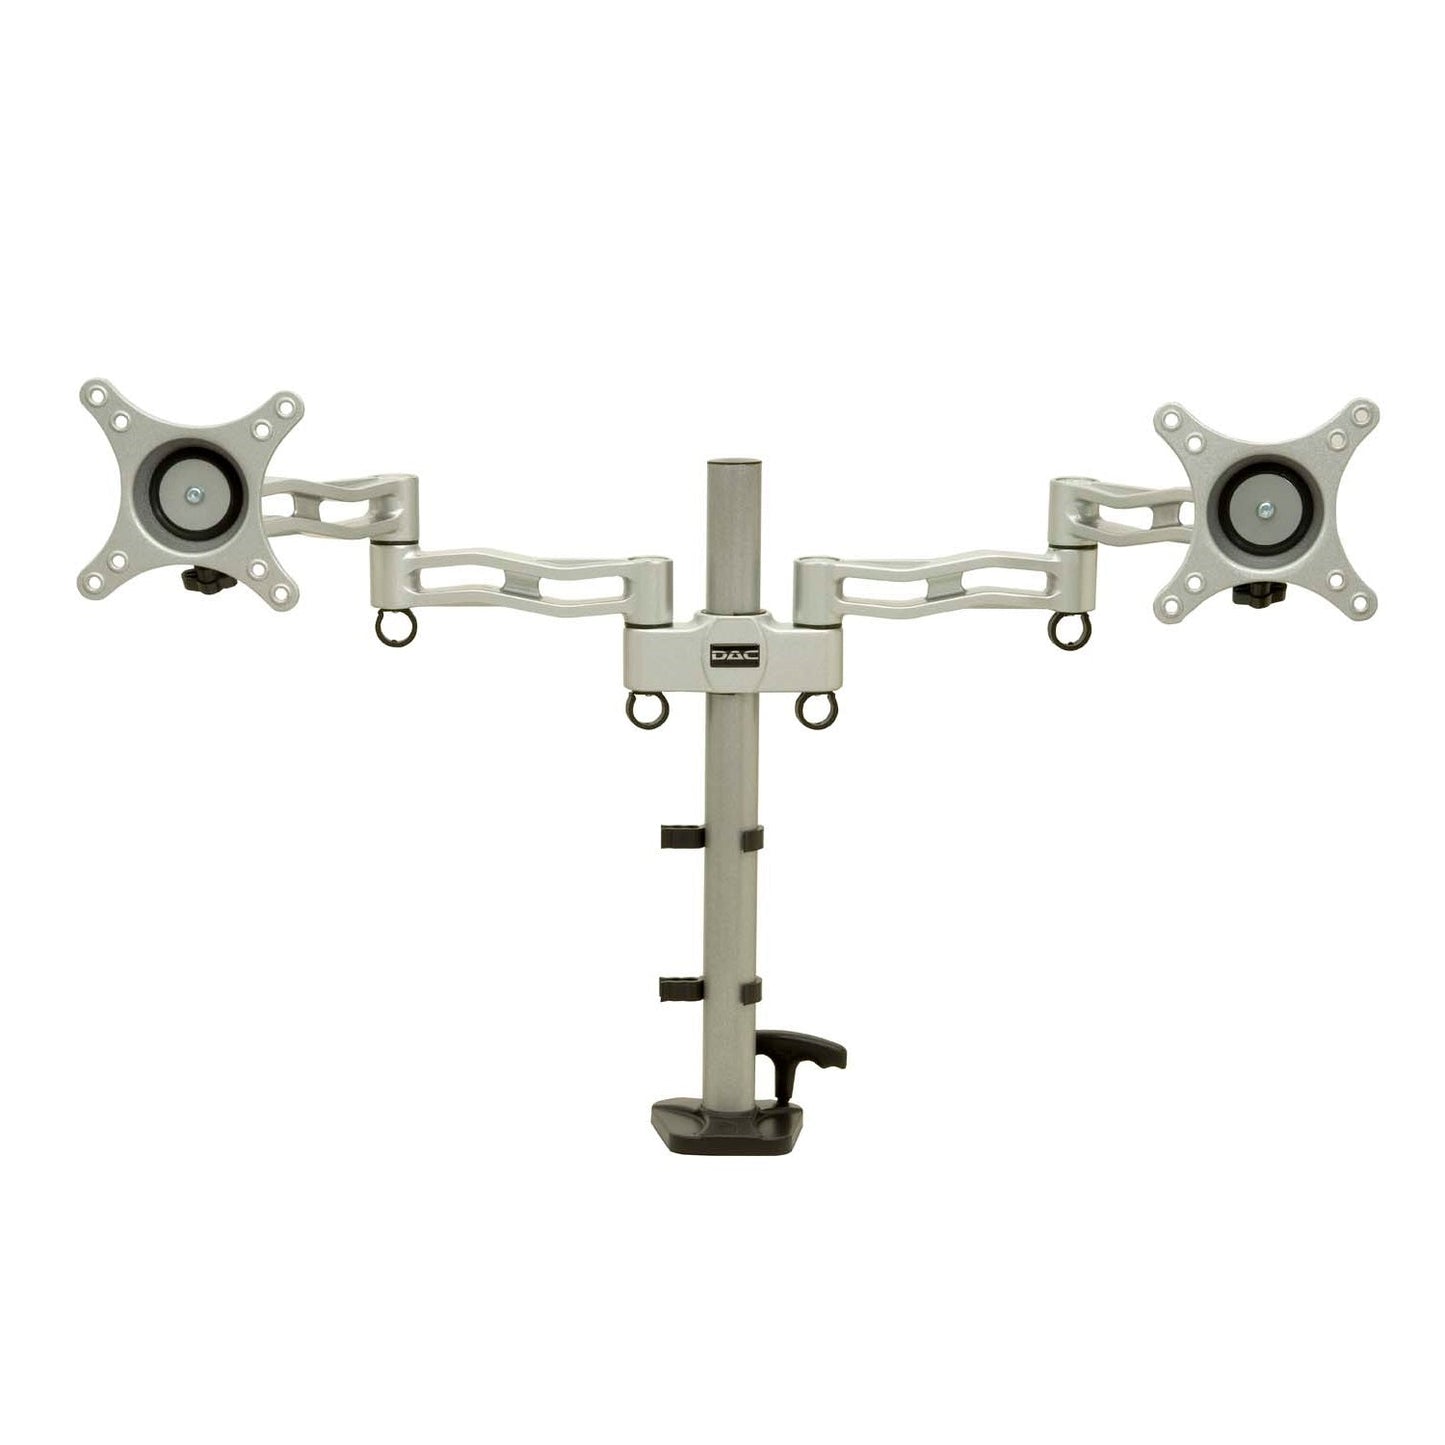 DAC® MP-200 Duo Height Adjustable Dual Articulating Monitor Arm, Silver